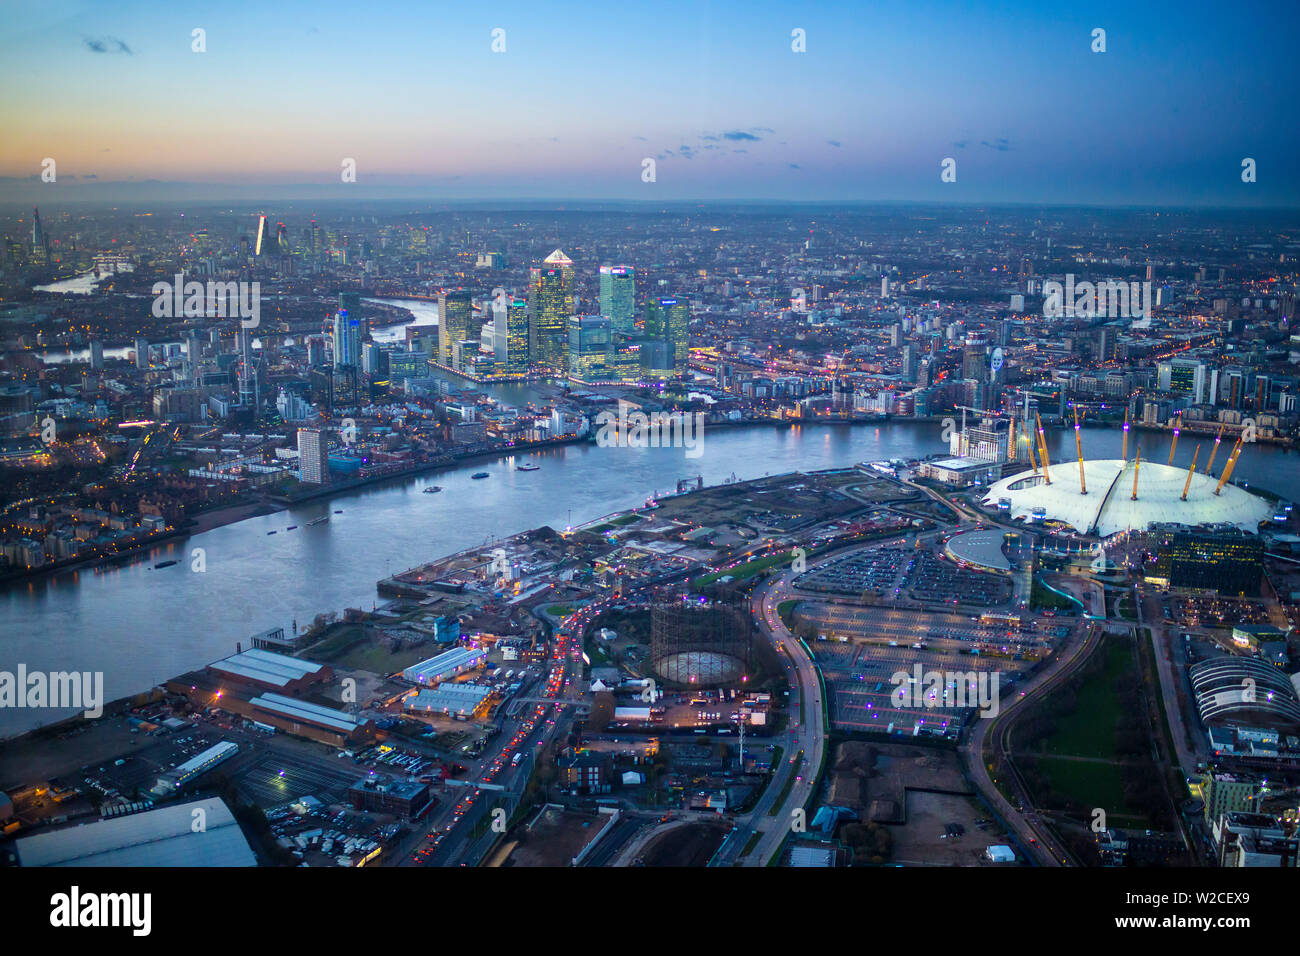 Vue aérienne sur O2 arena, Isle of Dogs et Canary Wharf, Londres, Angleterre Banque D'Images